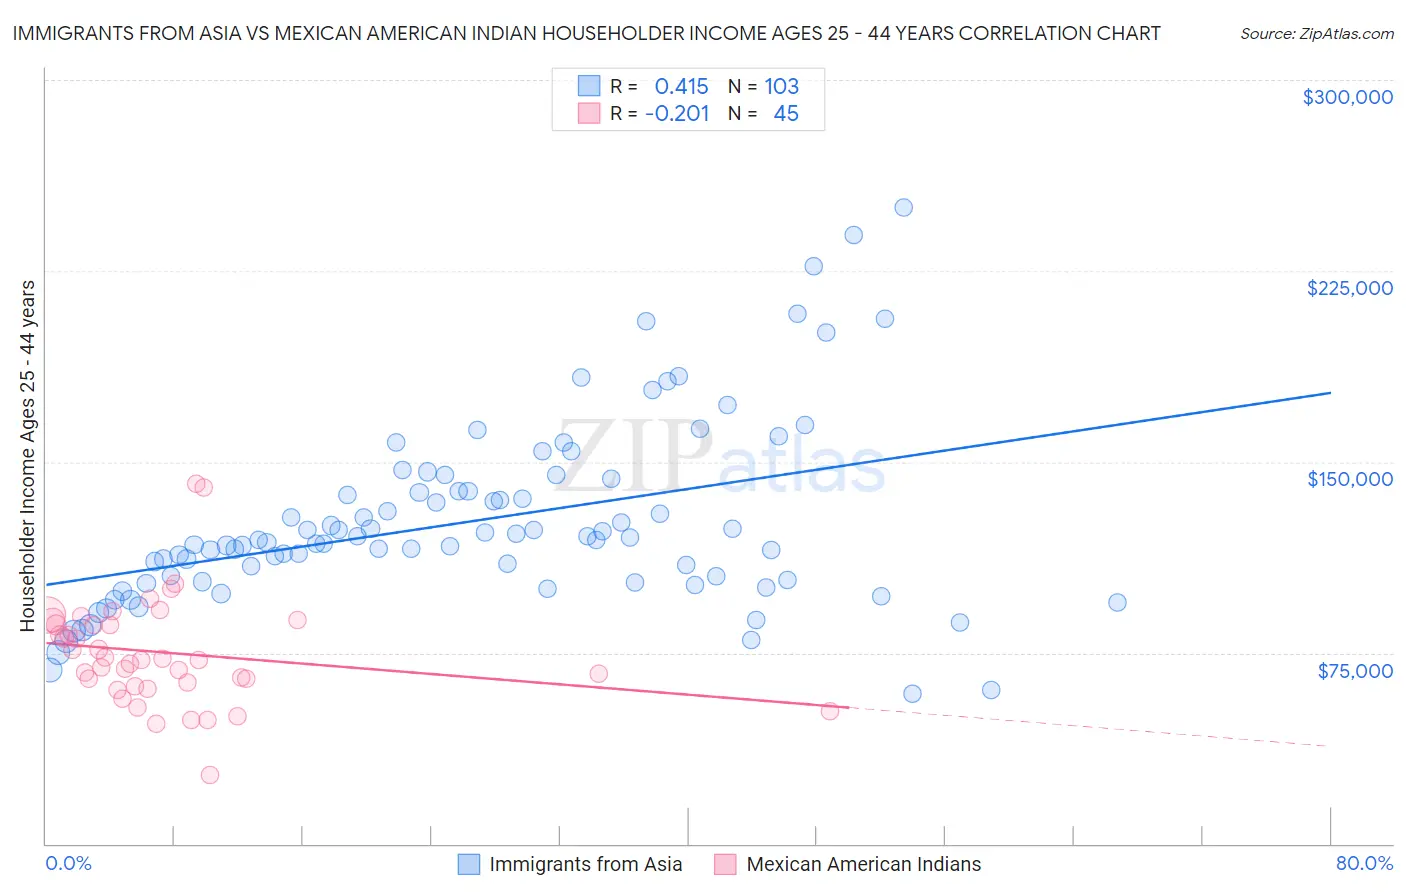 Immigrants from Asia vs Mexican American Indian Householder Income Ages 25 - 44 years